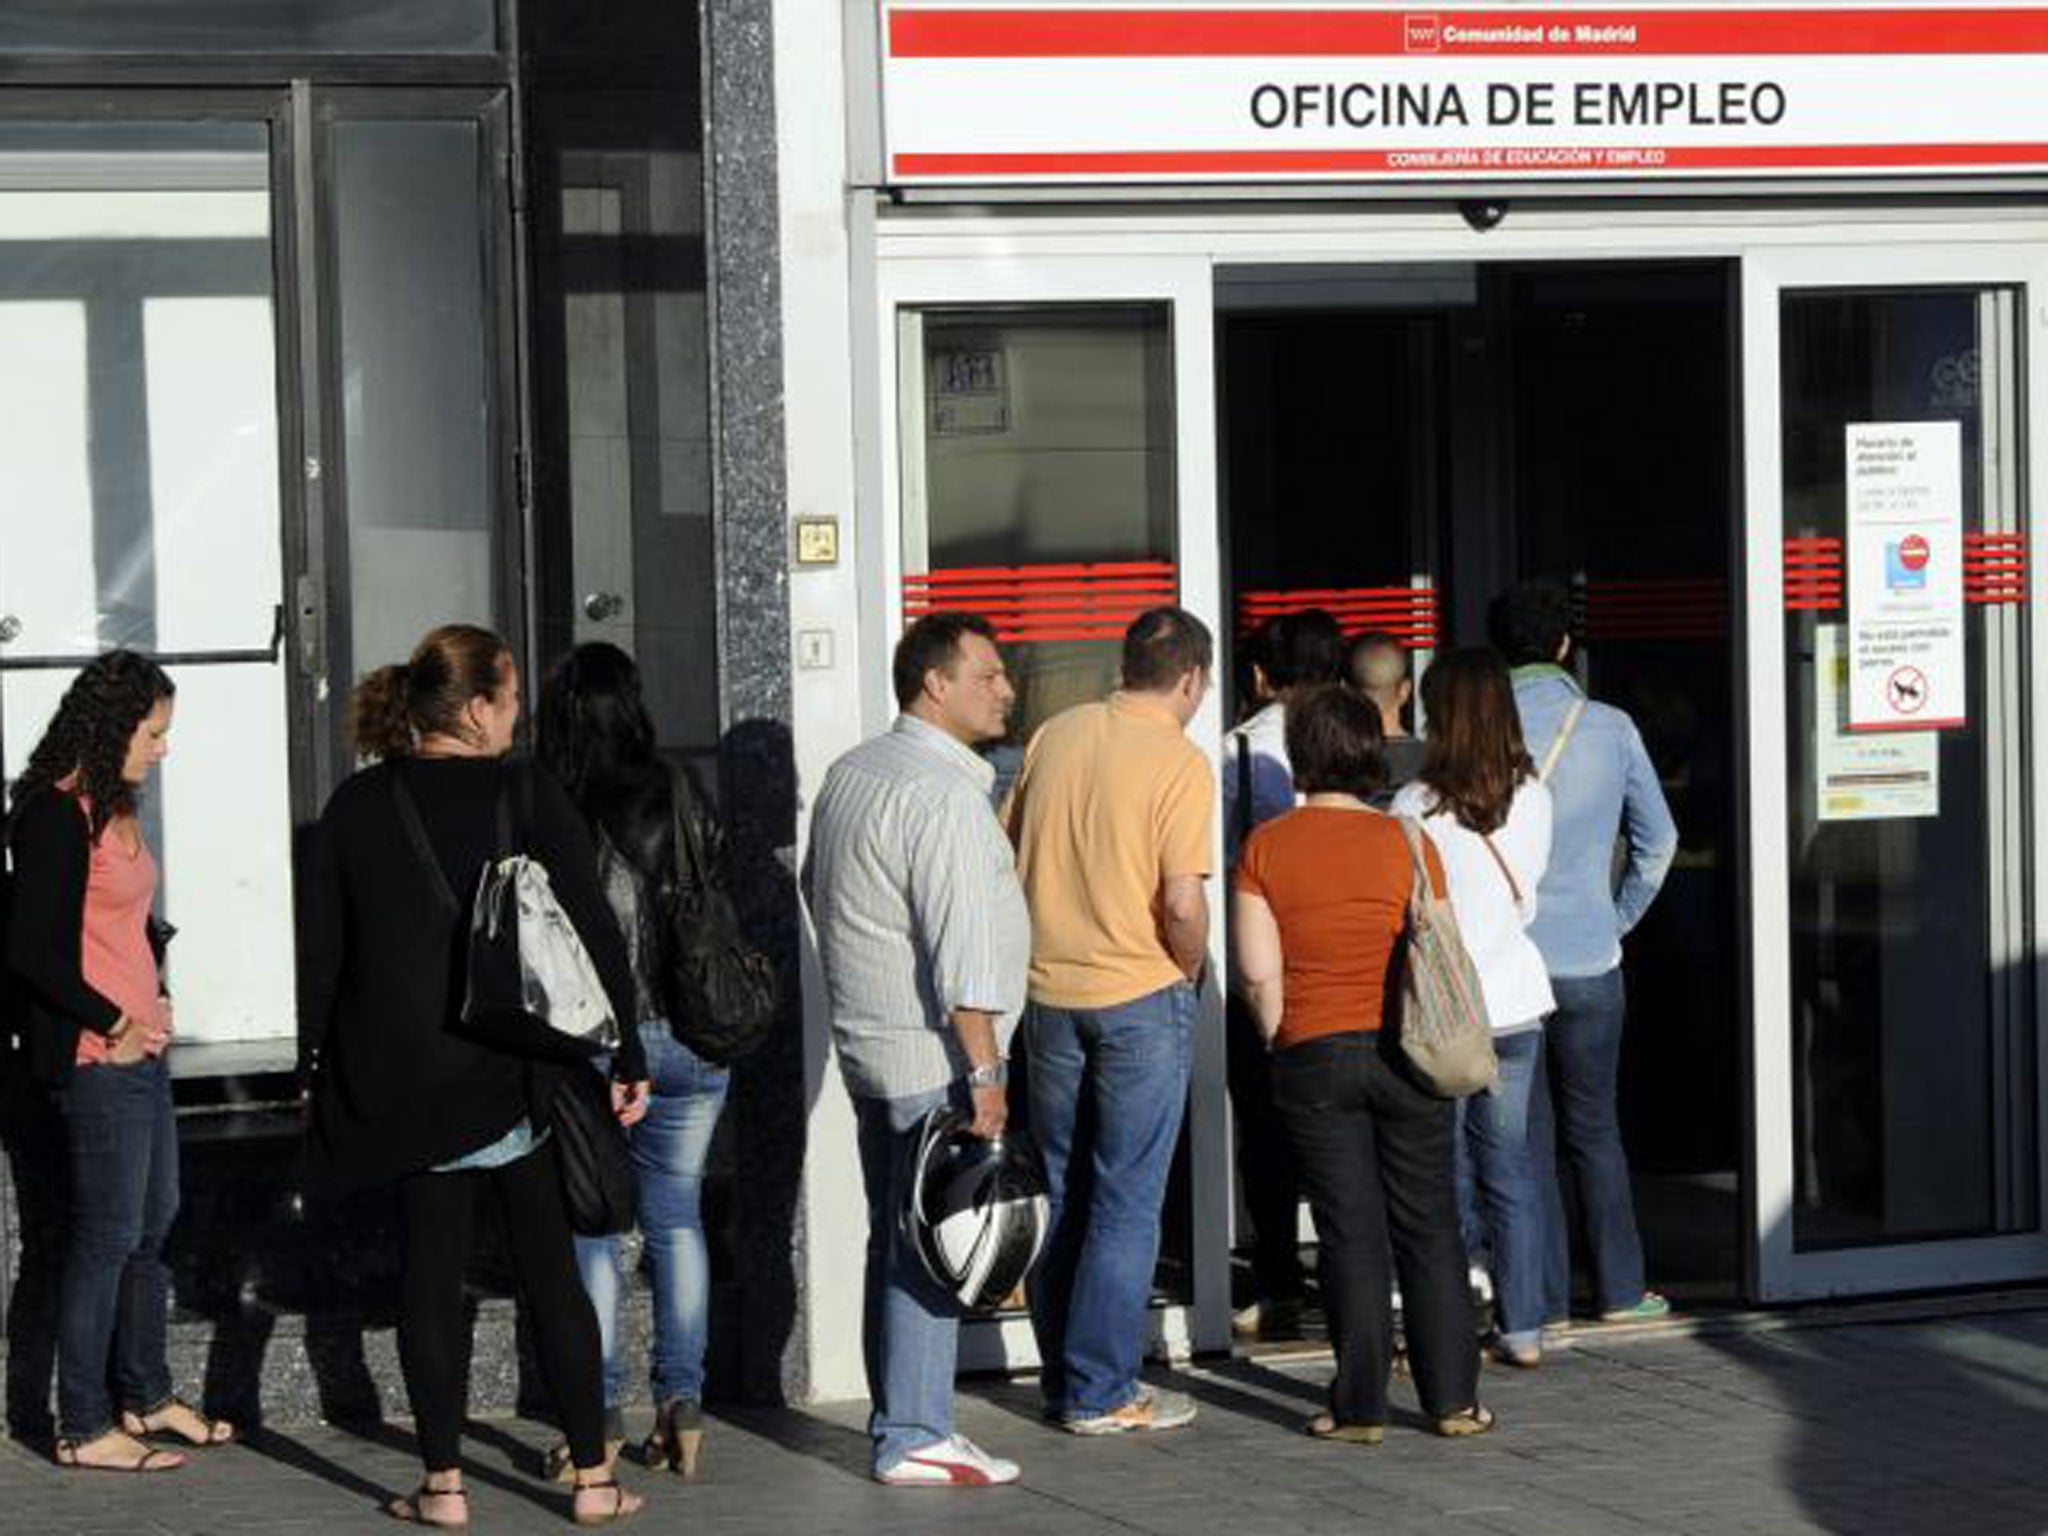 People waiting in line at a government employment office in the center of Madrid